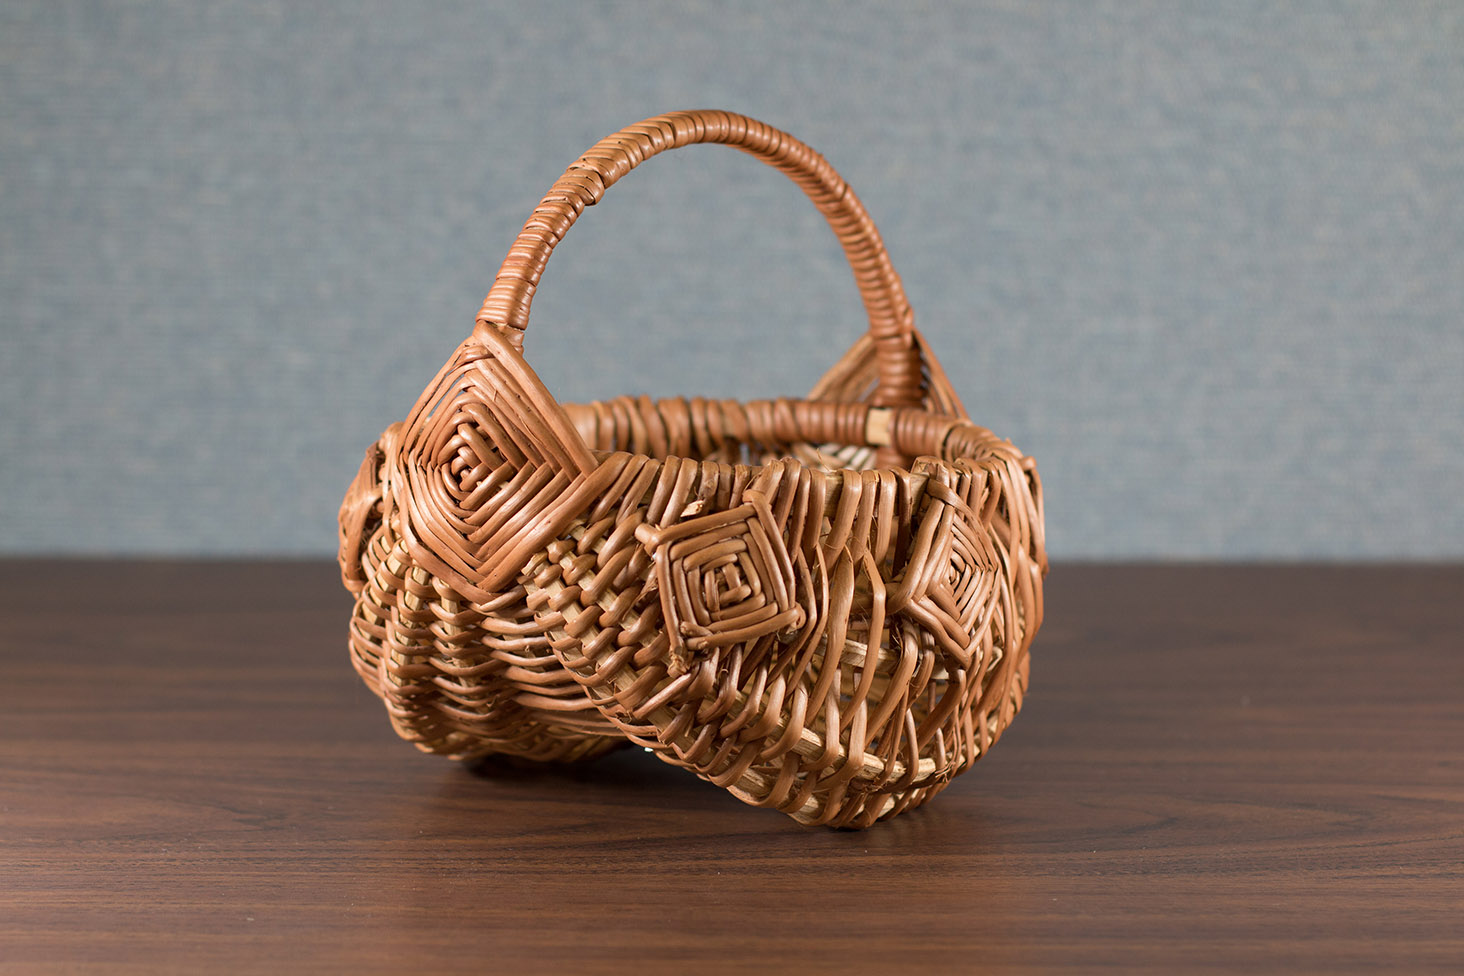 communityalbums - Acadian basket made by George Saulnier, from Hectanooga, NS